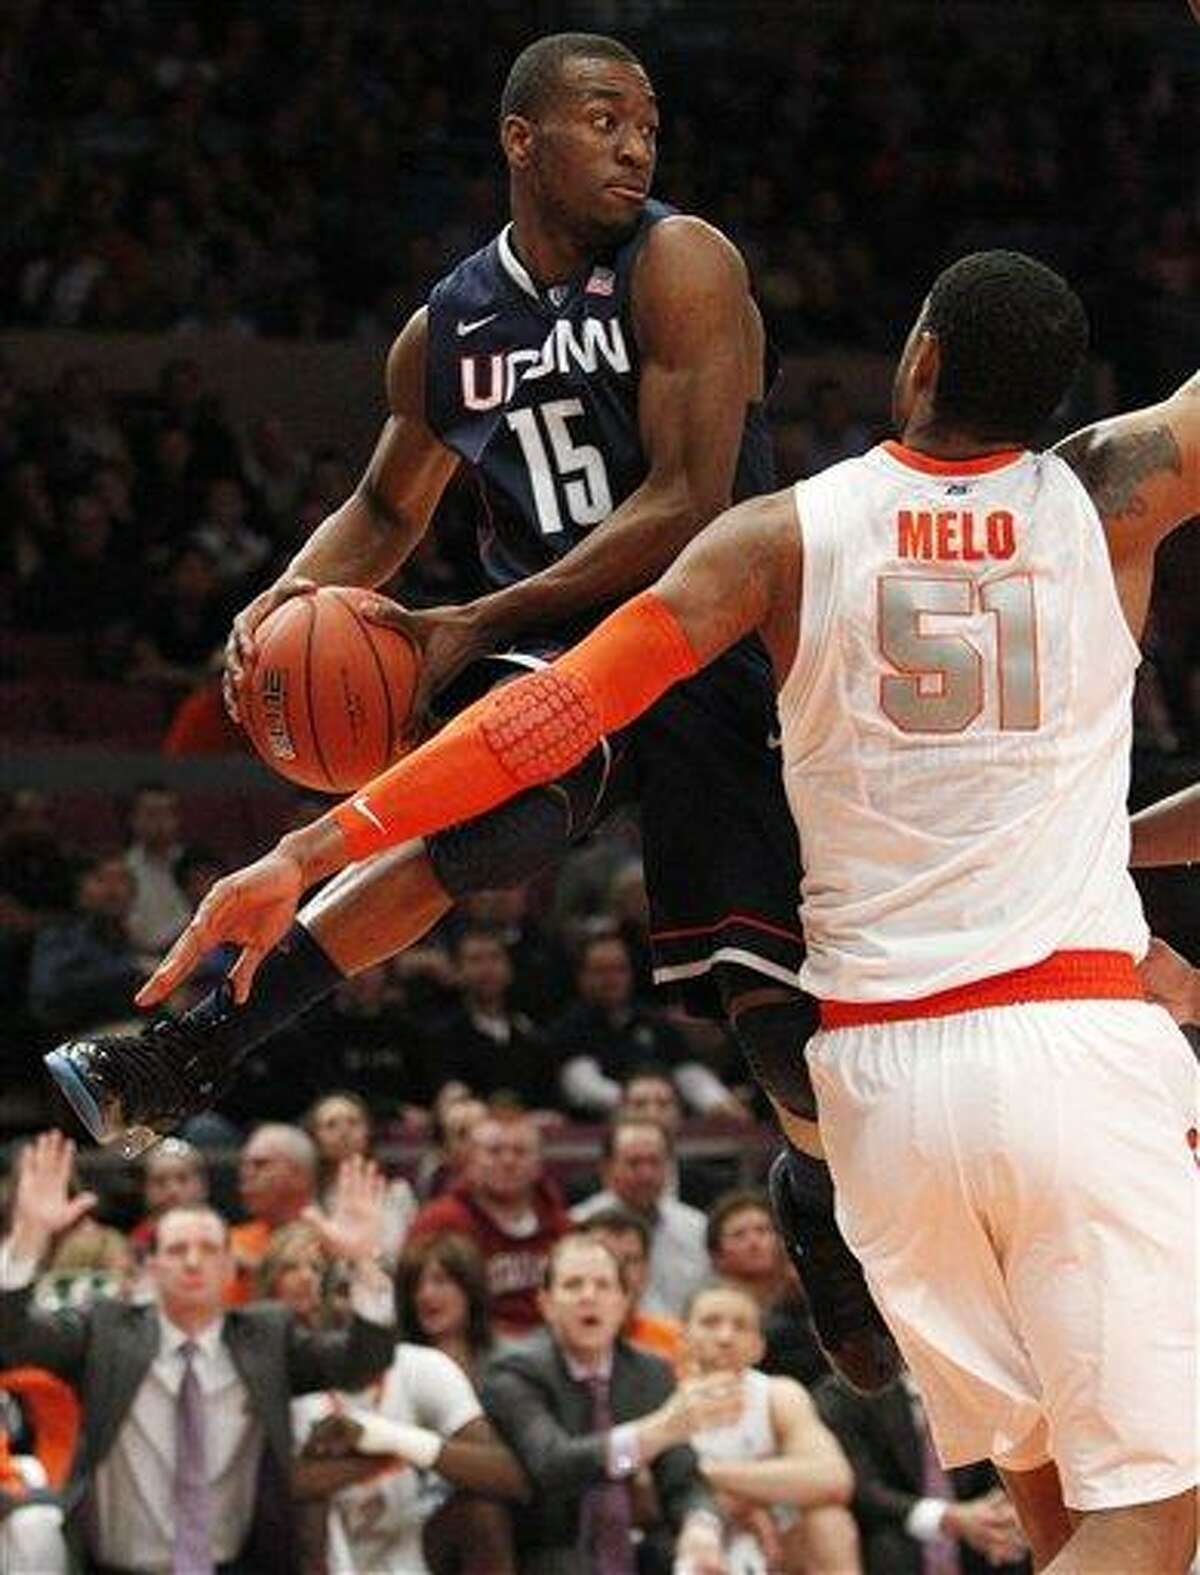 Connecticut's Kemba Walker (15) passes away from Syracuse's Fab Melo (51) during the first half of an NCAA college basketball game at the Big East Championship Friday, March 11, 2011, in New York. (AP Photo/Frank Franklin II)